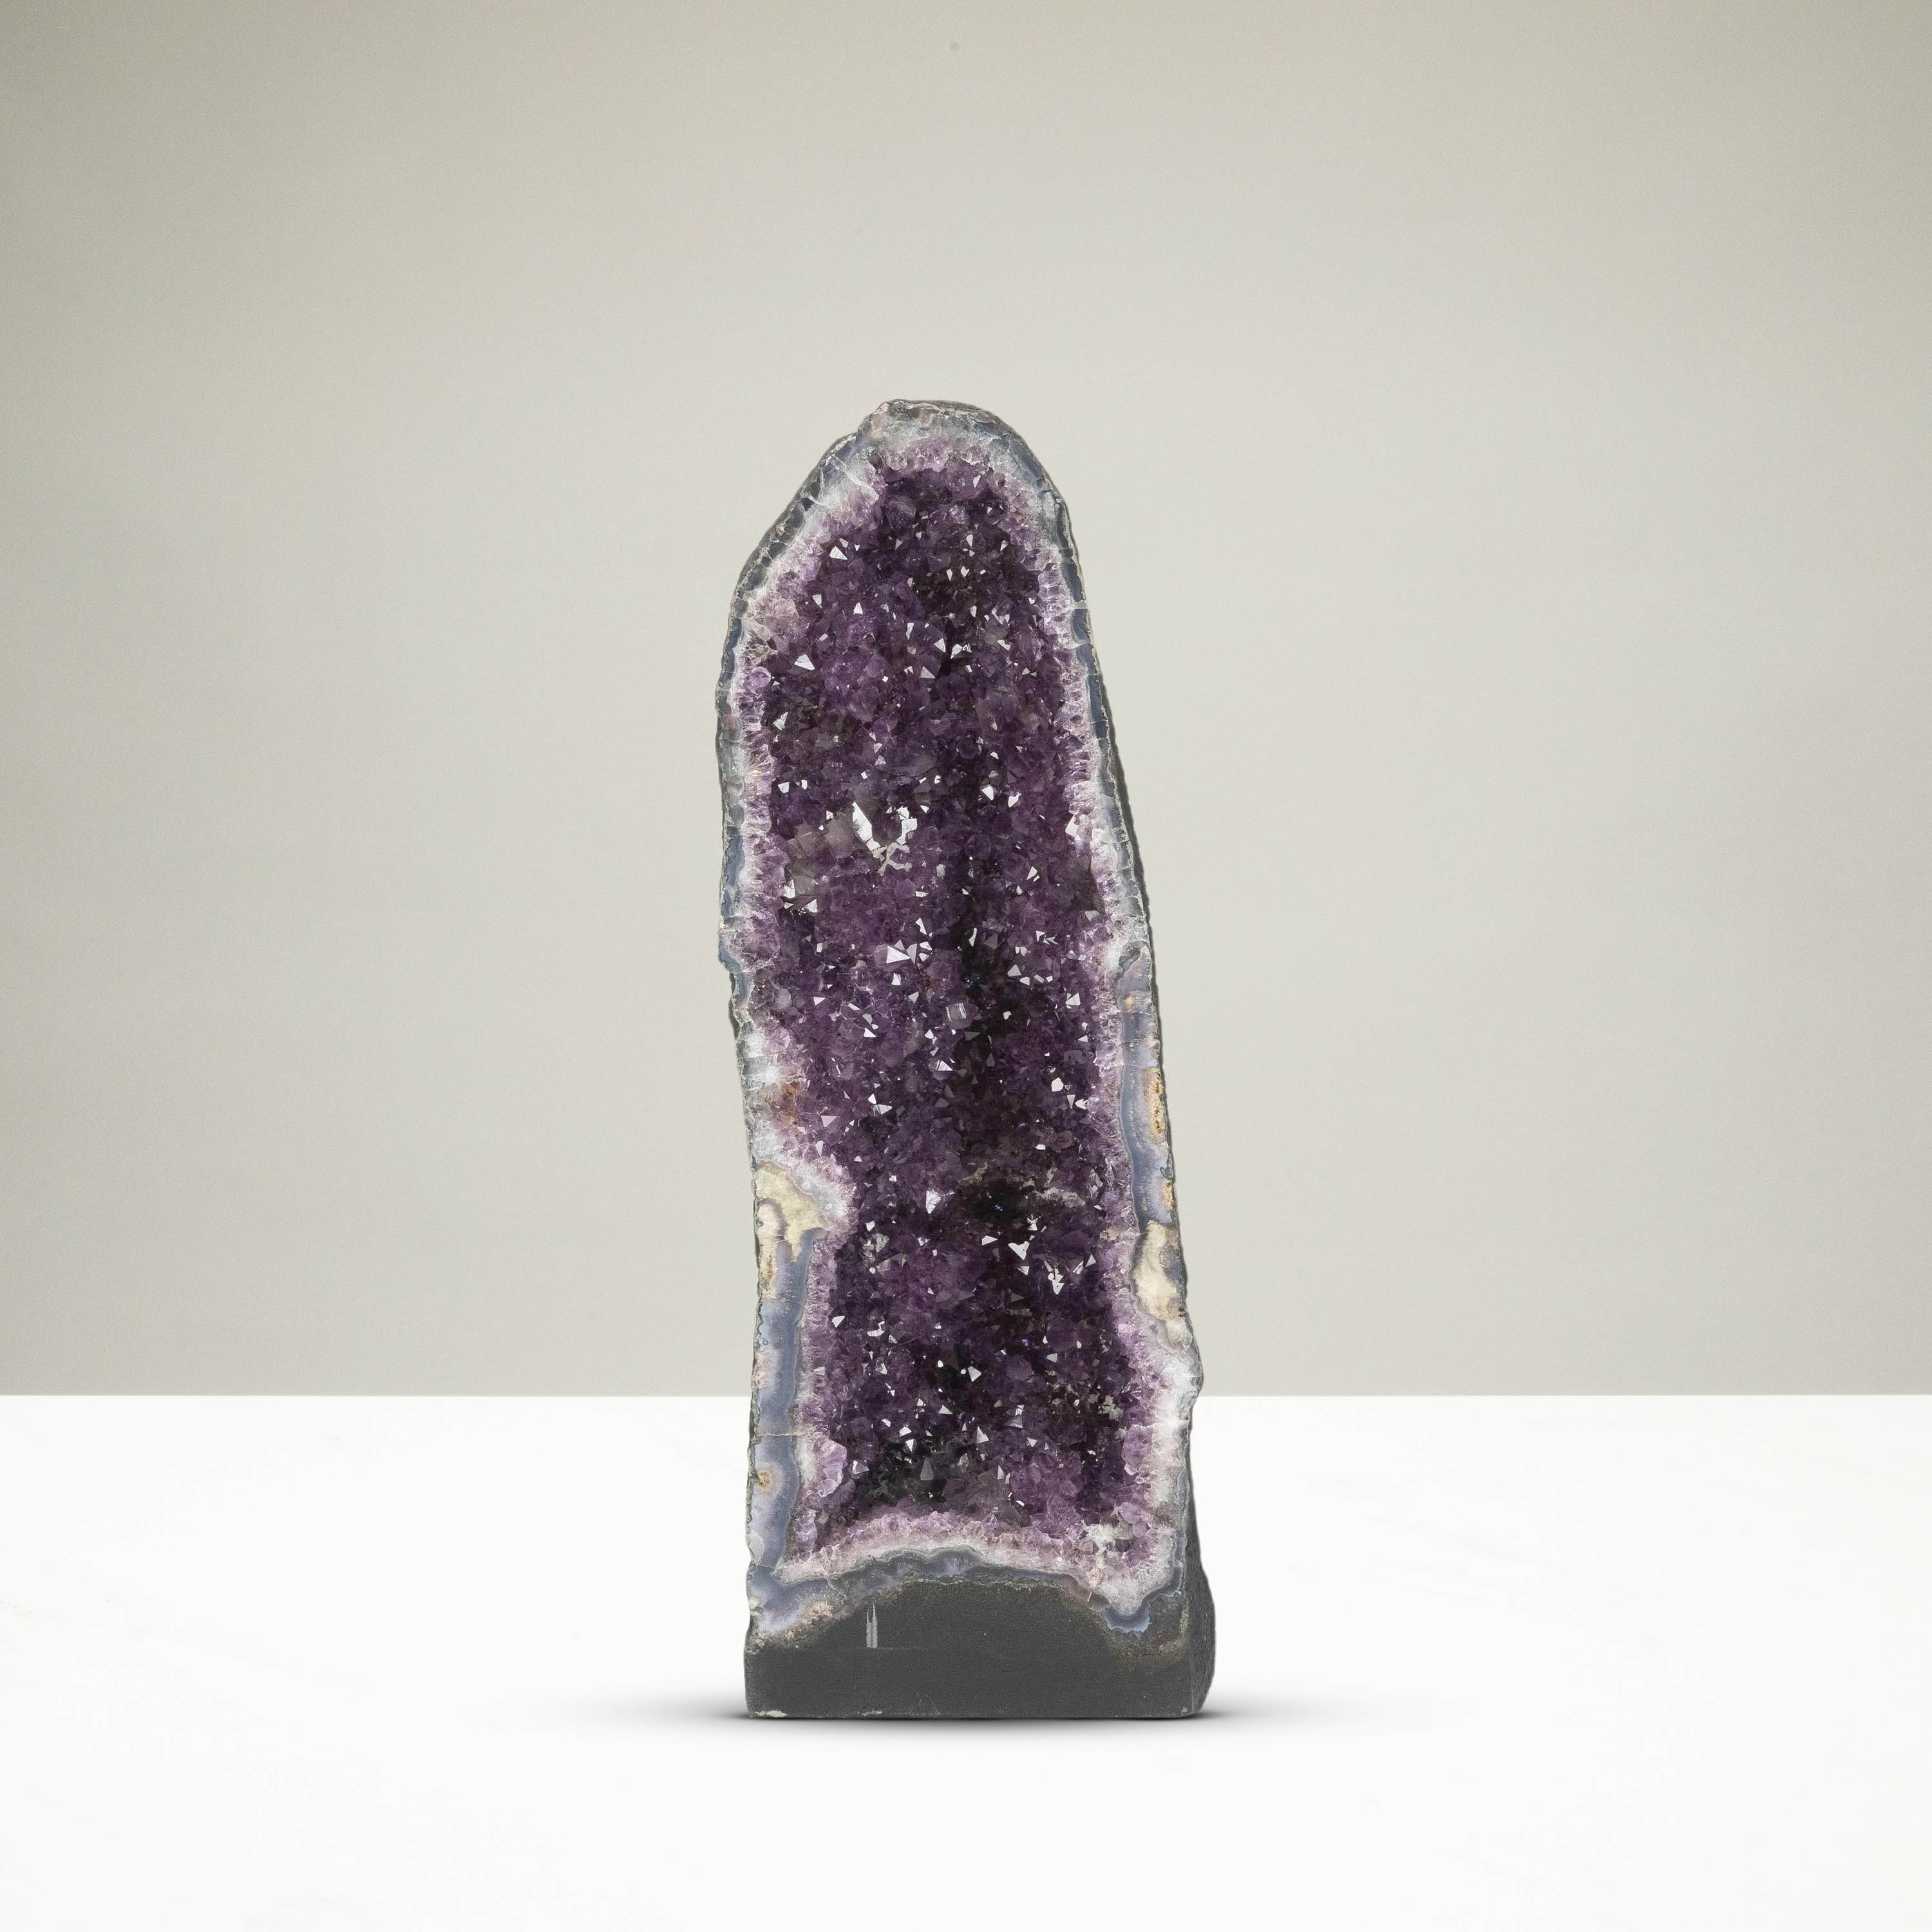 Kalifano Amethyst Amethyst Geode Cathedral - 27" / 75 lbs BAG12400.001